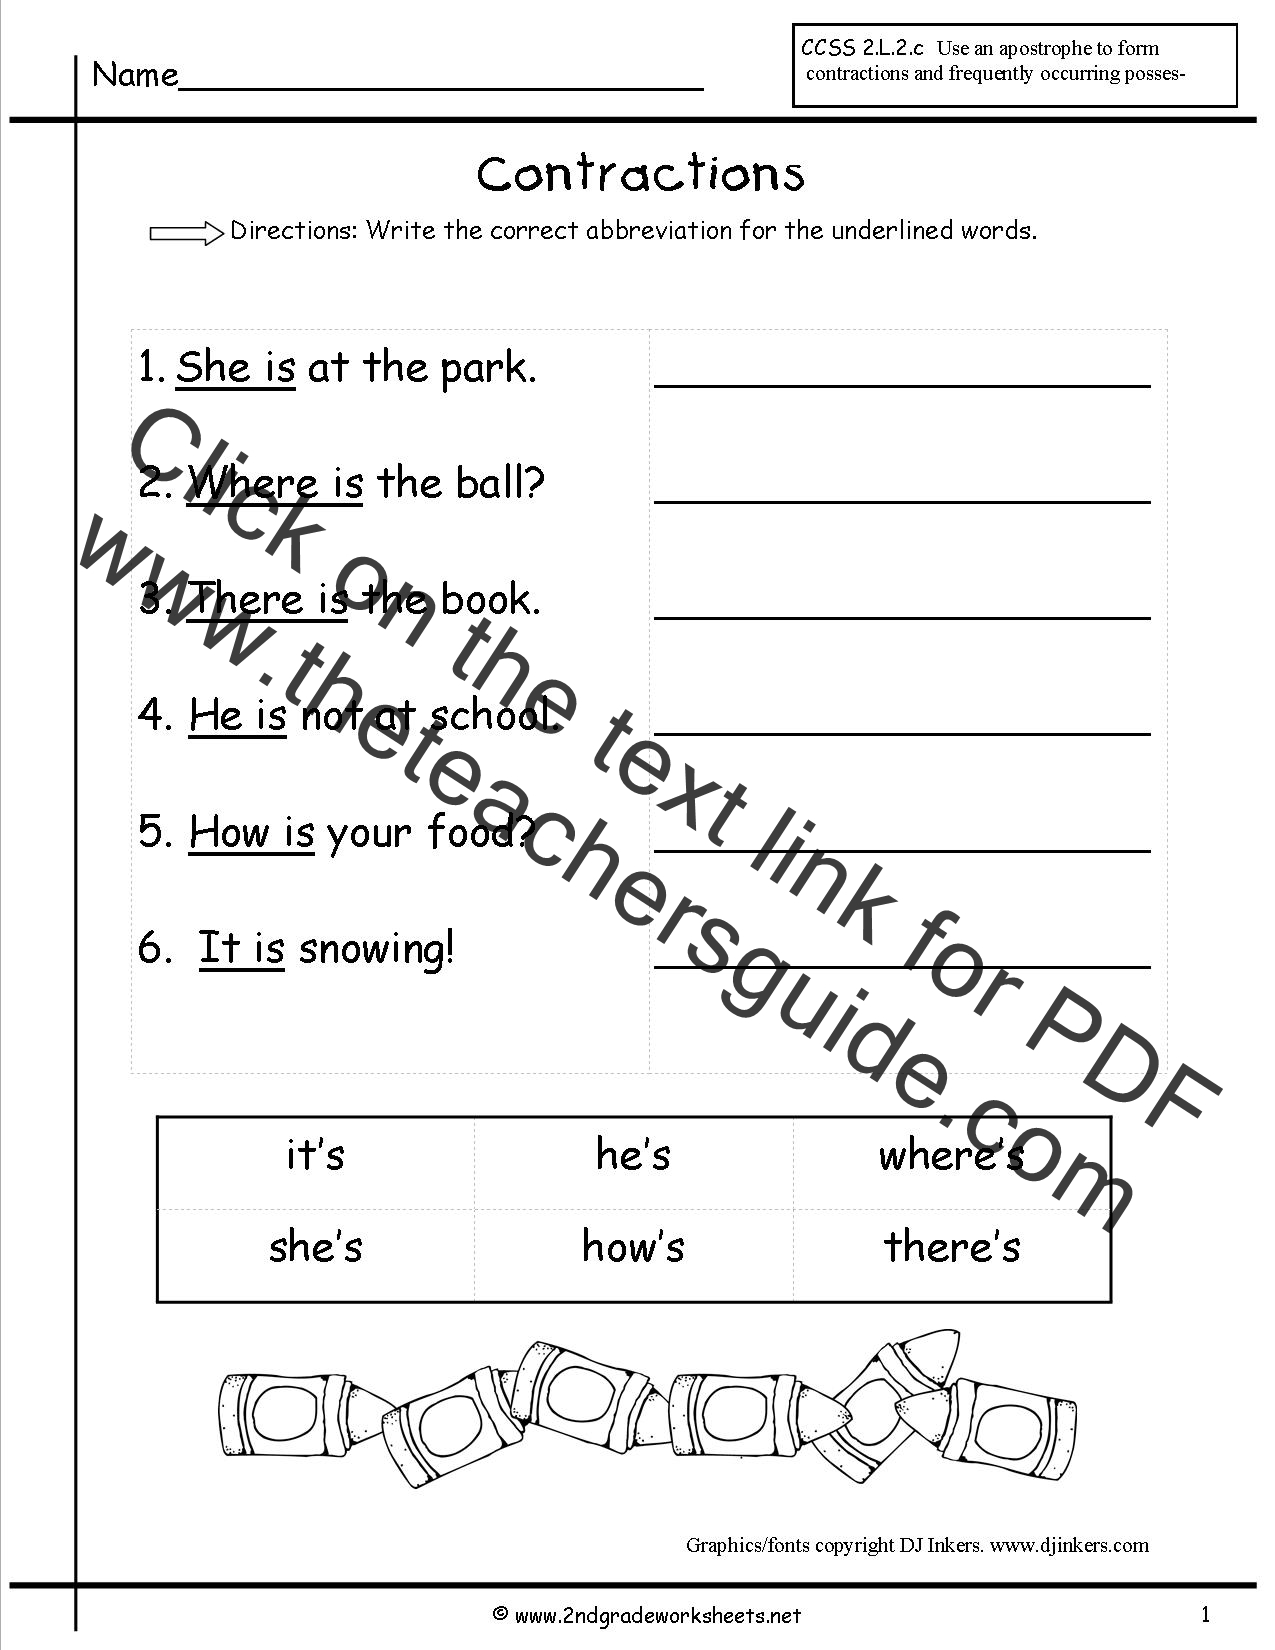 free-contractions-worksheets-and-printouts